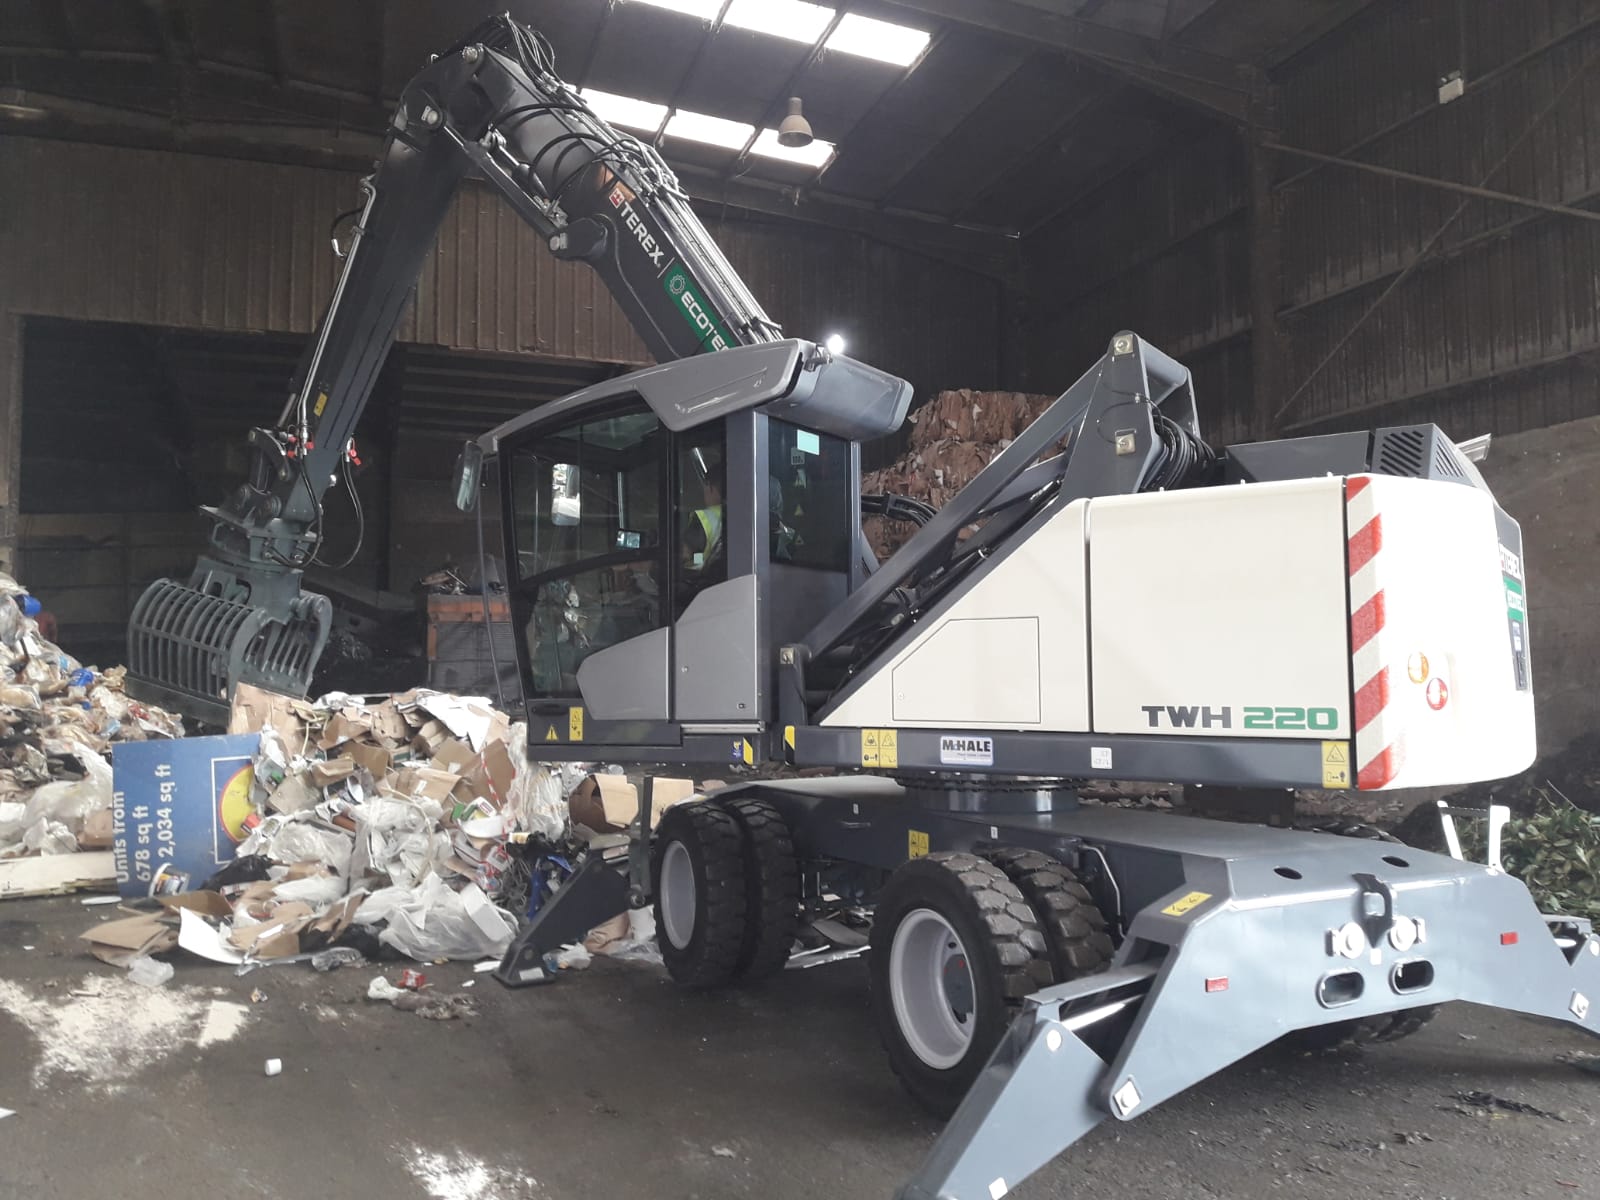 TWH220 Waste Lifter